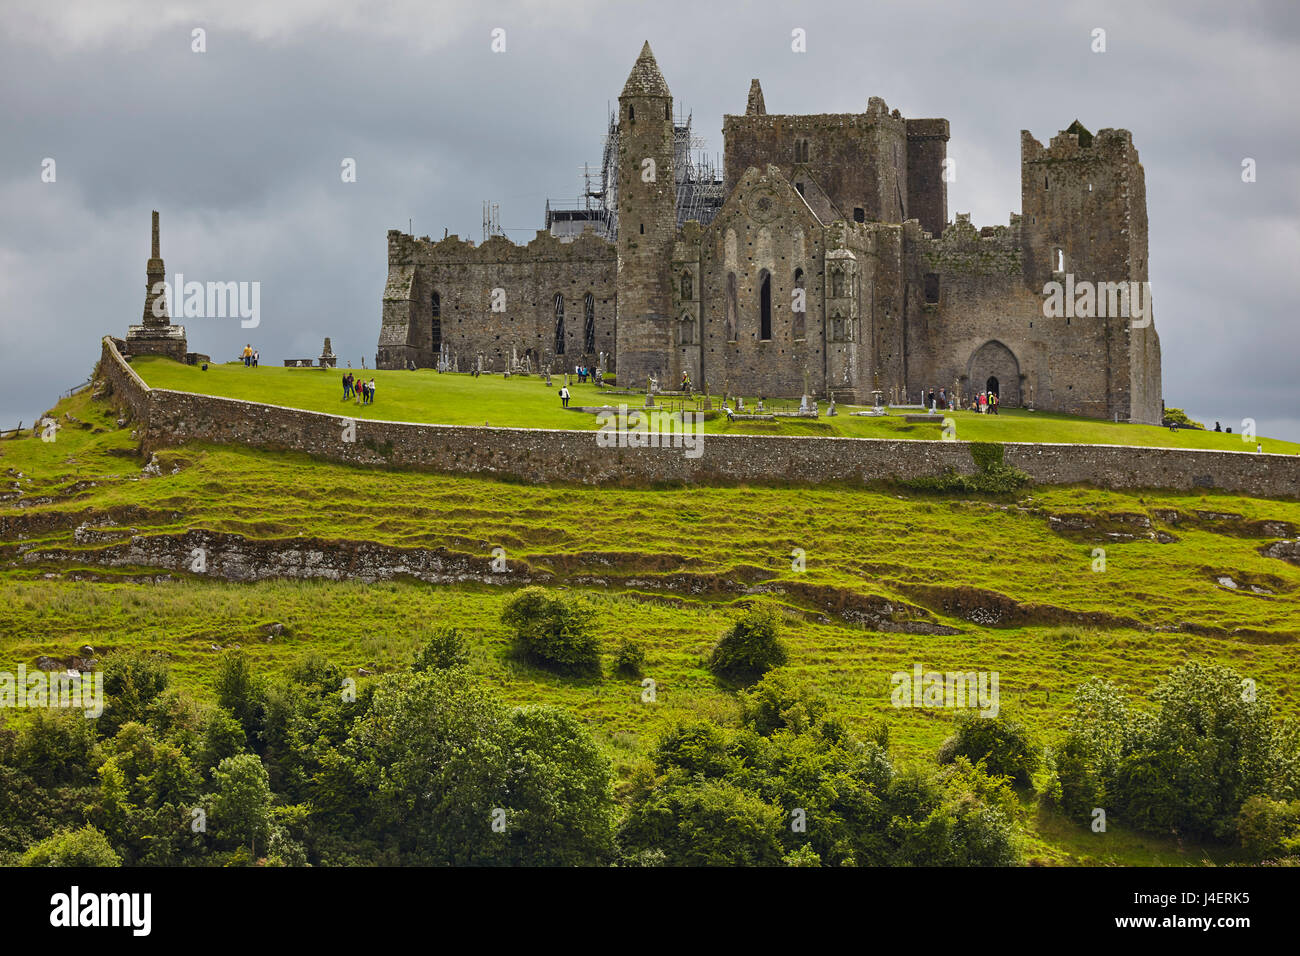 The ruins of the Rock of Cashel, Cashel, County Tipperary, Munster, Republic of Ireland, Europe Stock Photo